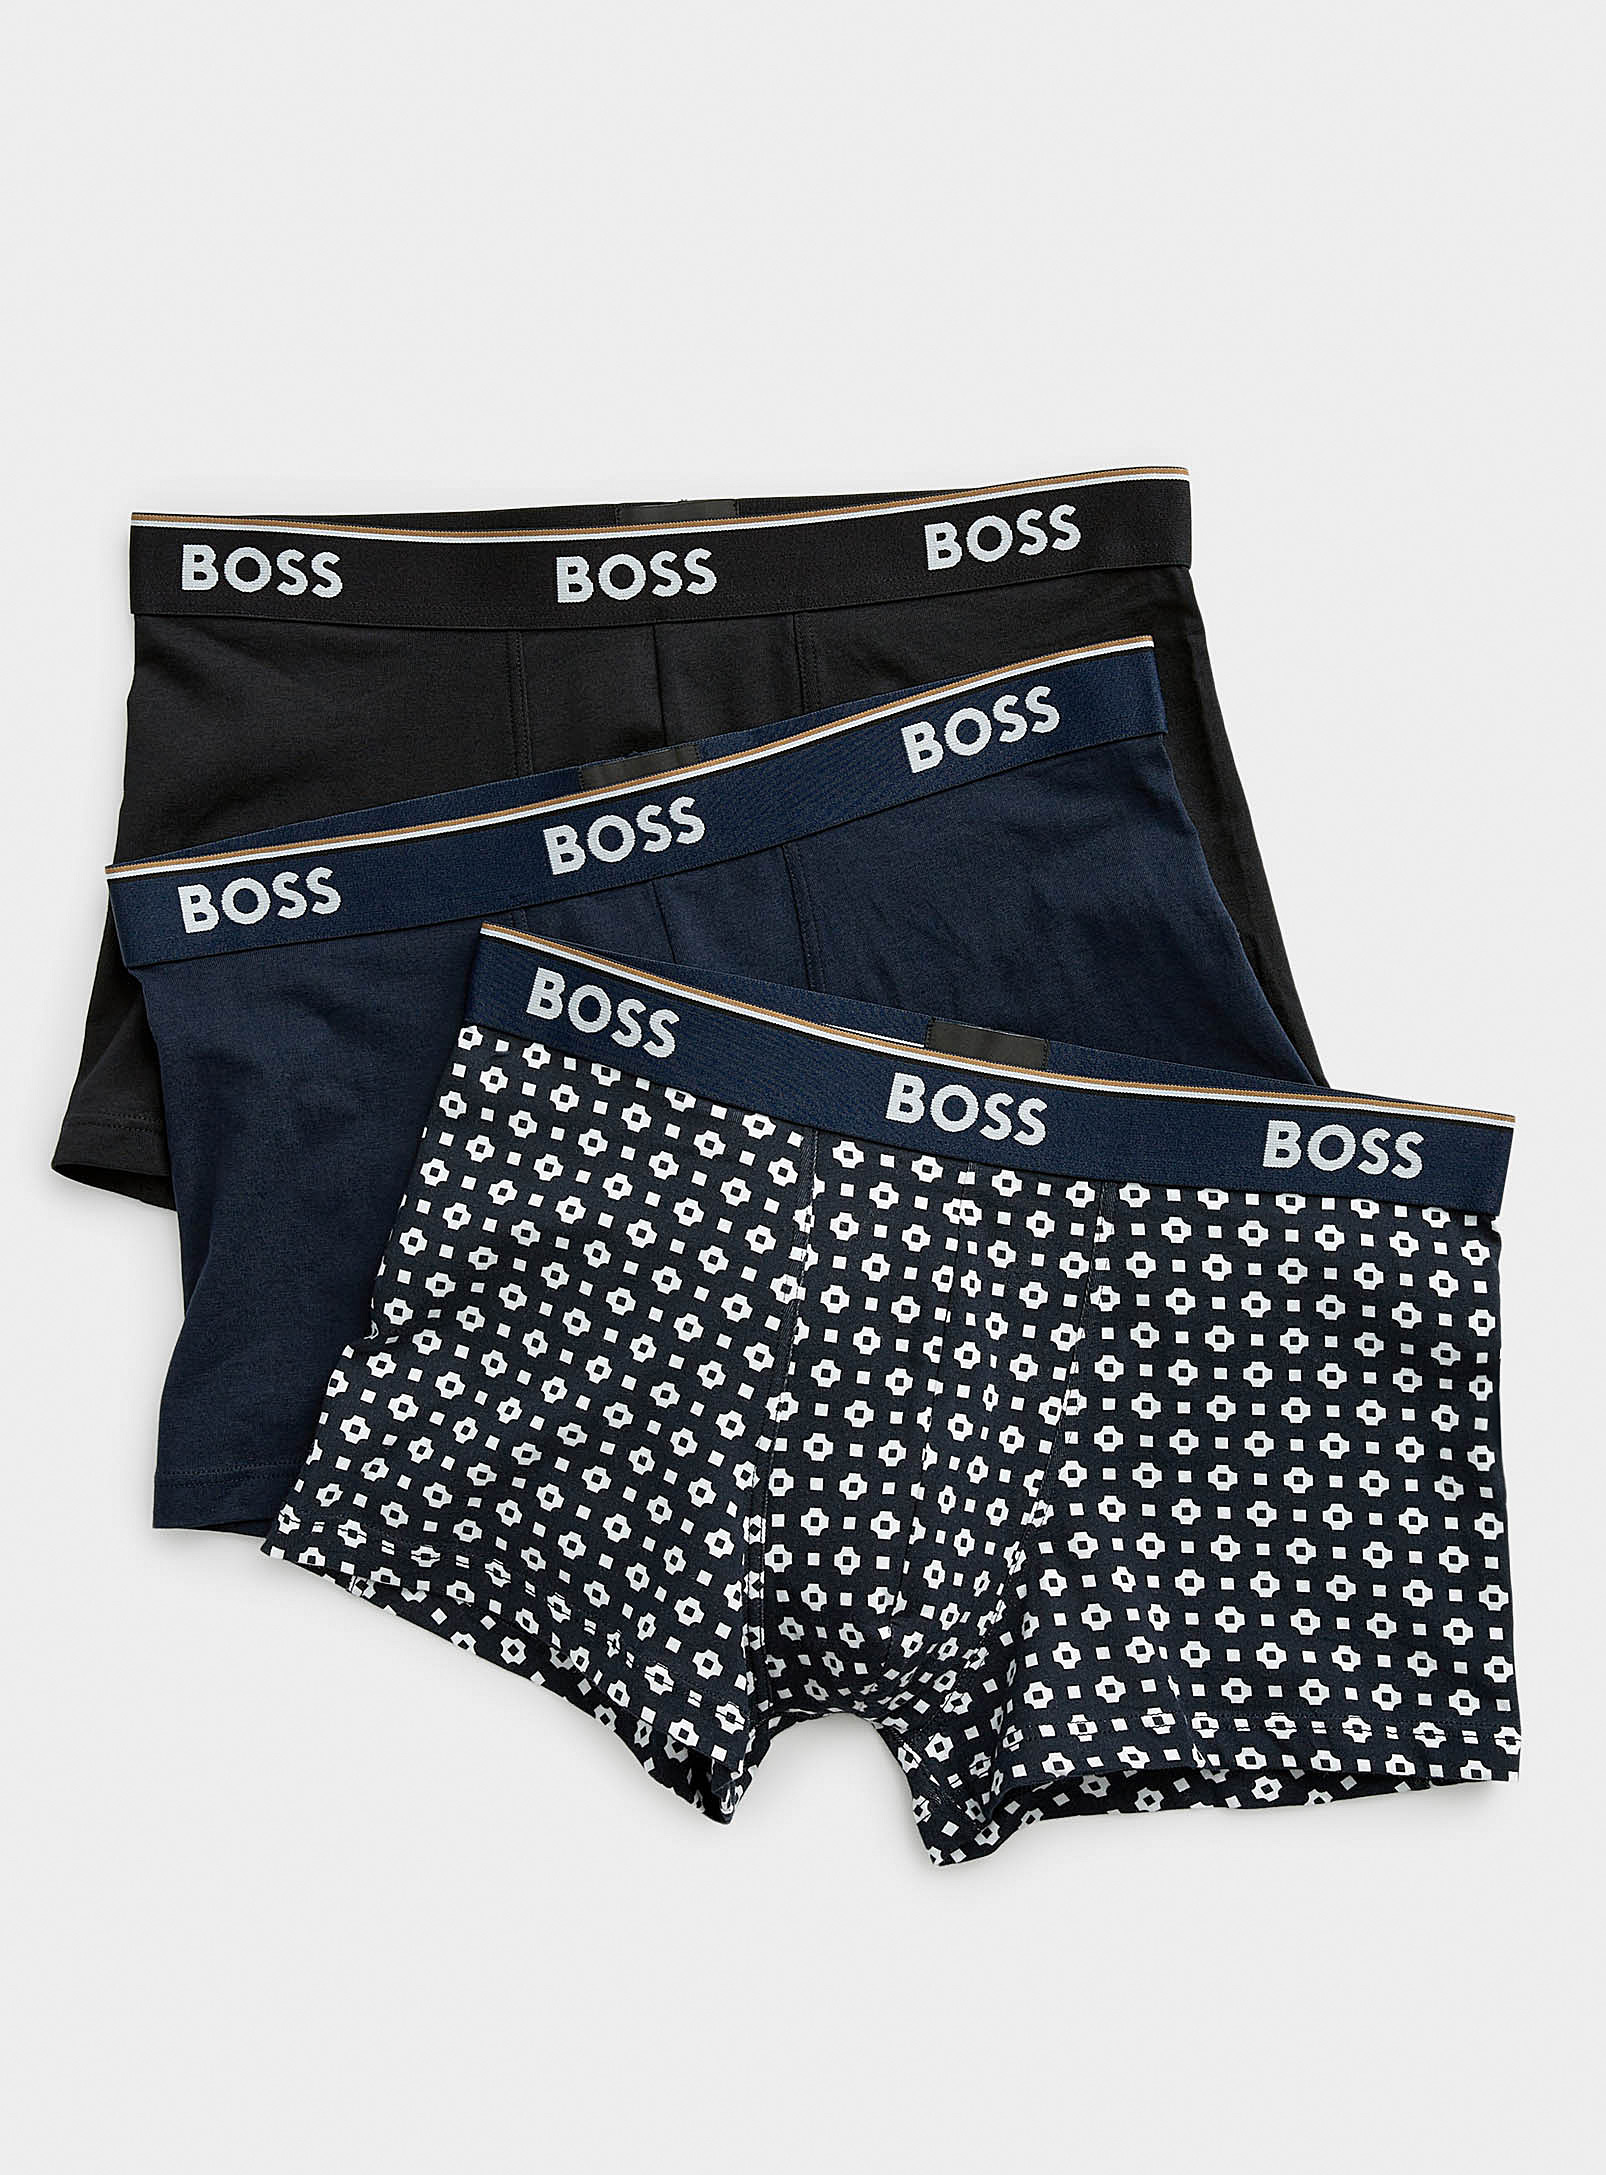 BOSS - Men's Solid and geo-pattern trunks 3-pack